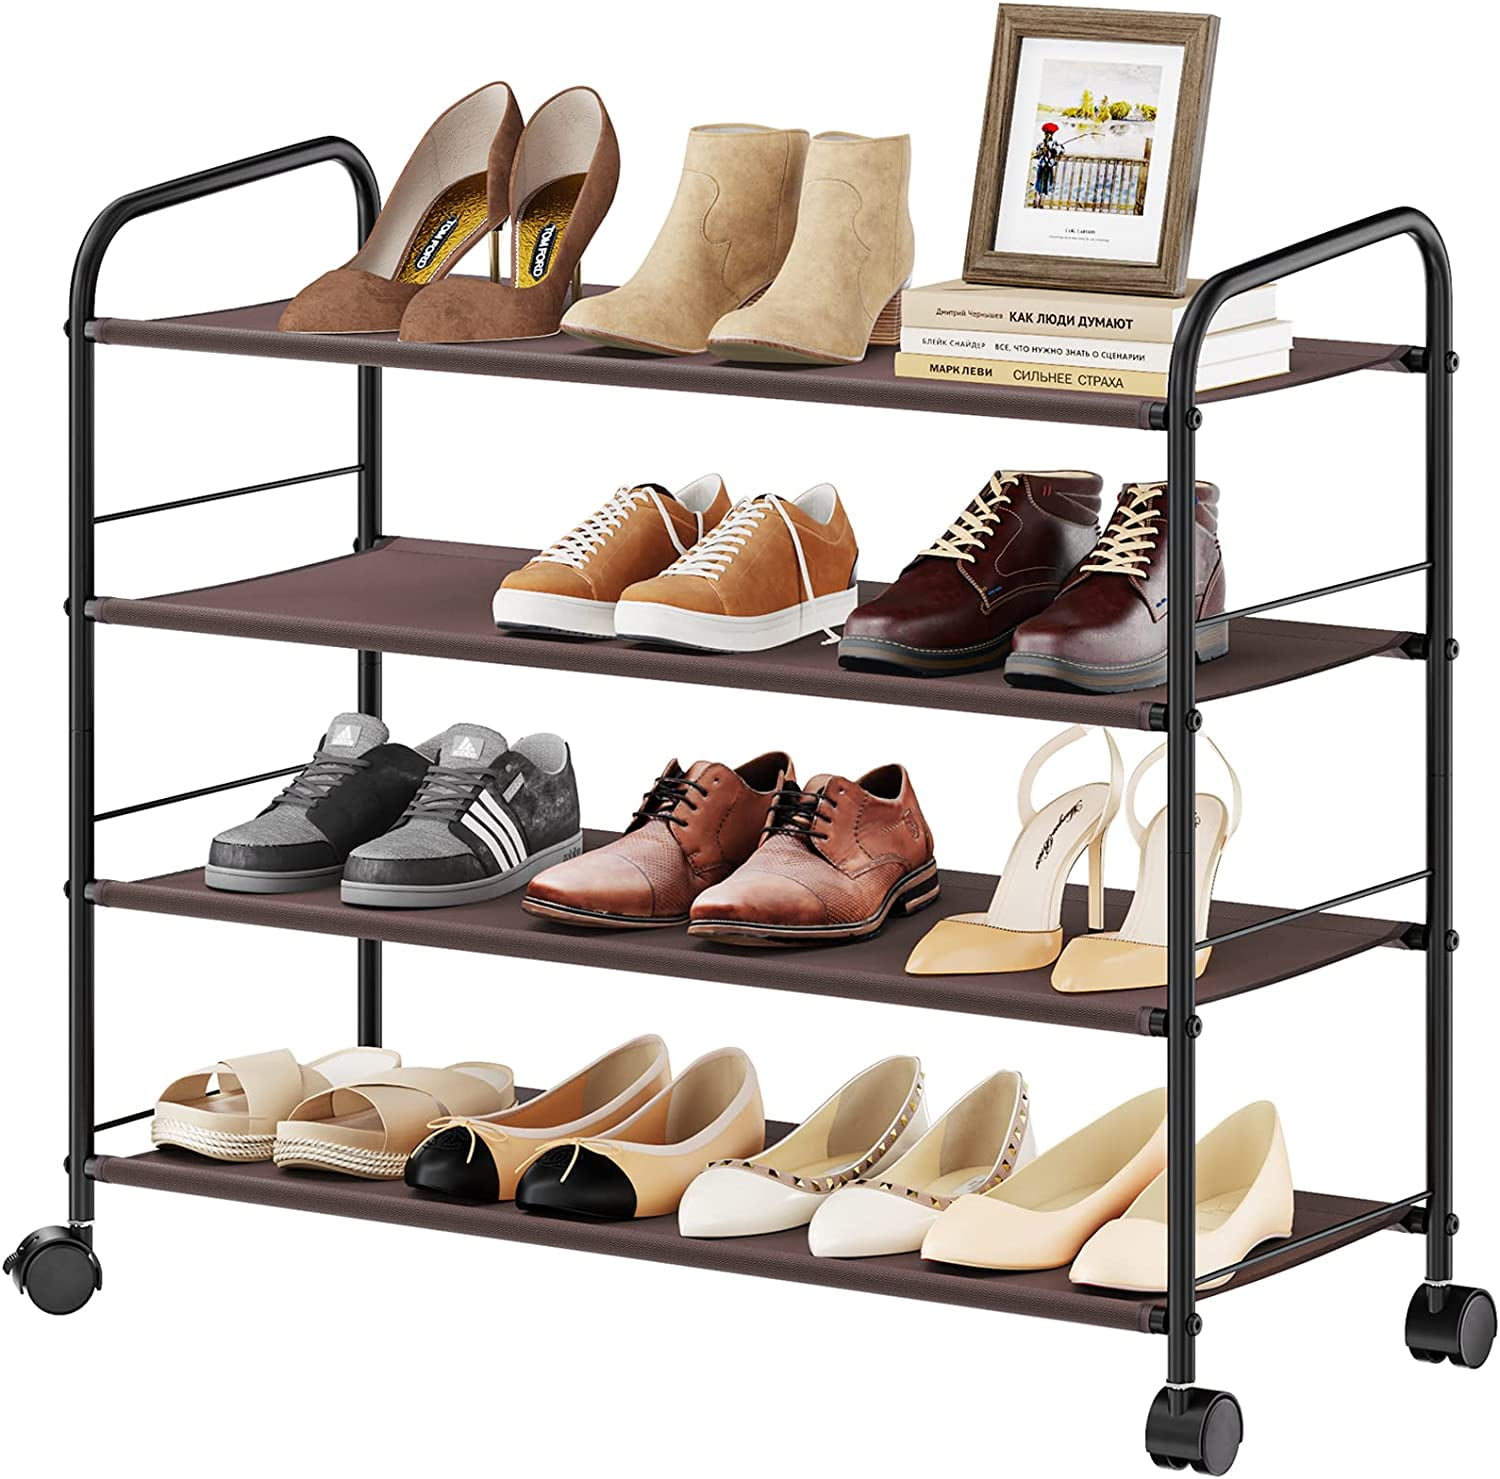  YMYNY Freestanding Shoe Racks, 3 Tiers Stackable & Adjustable Shoe  Storage Shelf, Extra Large Capacity Shoe Organizer Stand for 20-24 Pairs,  for Entryway, Closet, Bedroom, Black, 42.9 L, UHXJ302B : Home